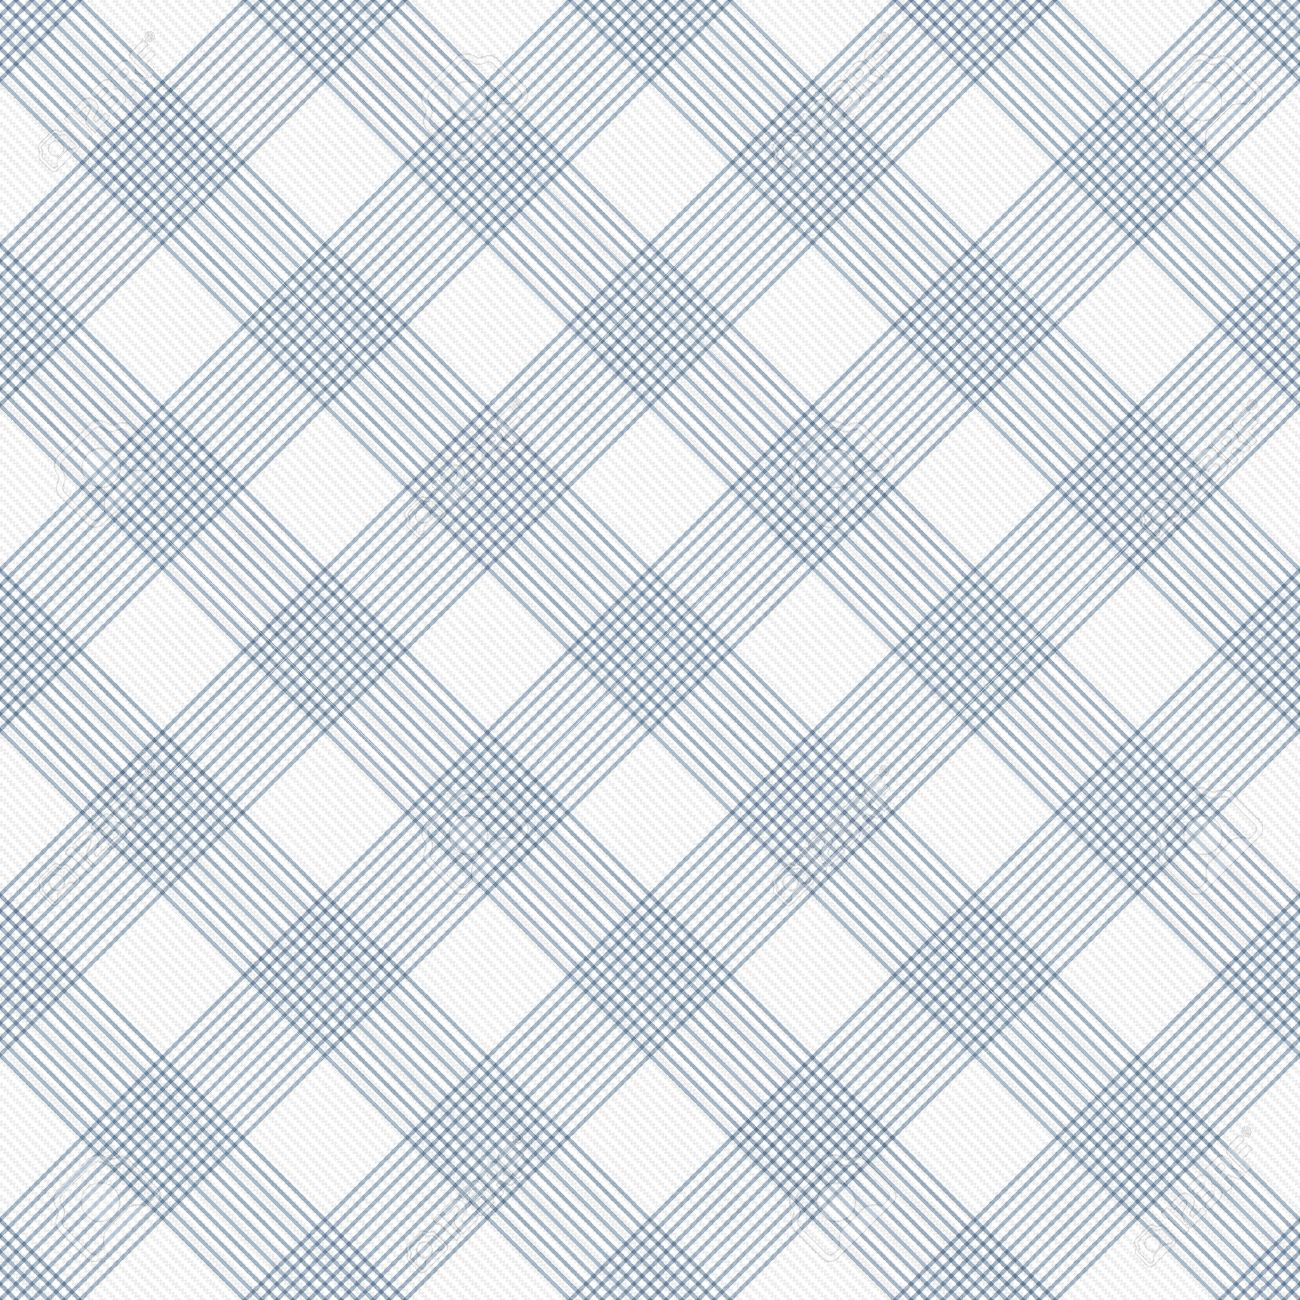 Blue And White Striped Gingham Tile Pattern Repeat Background